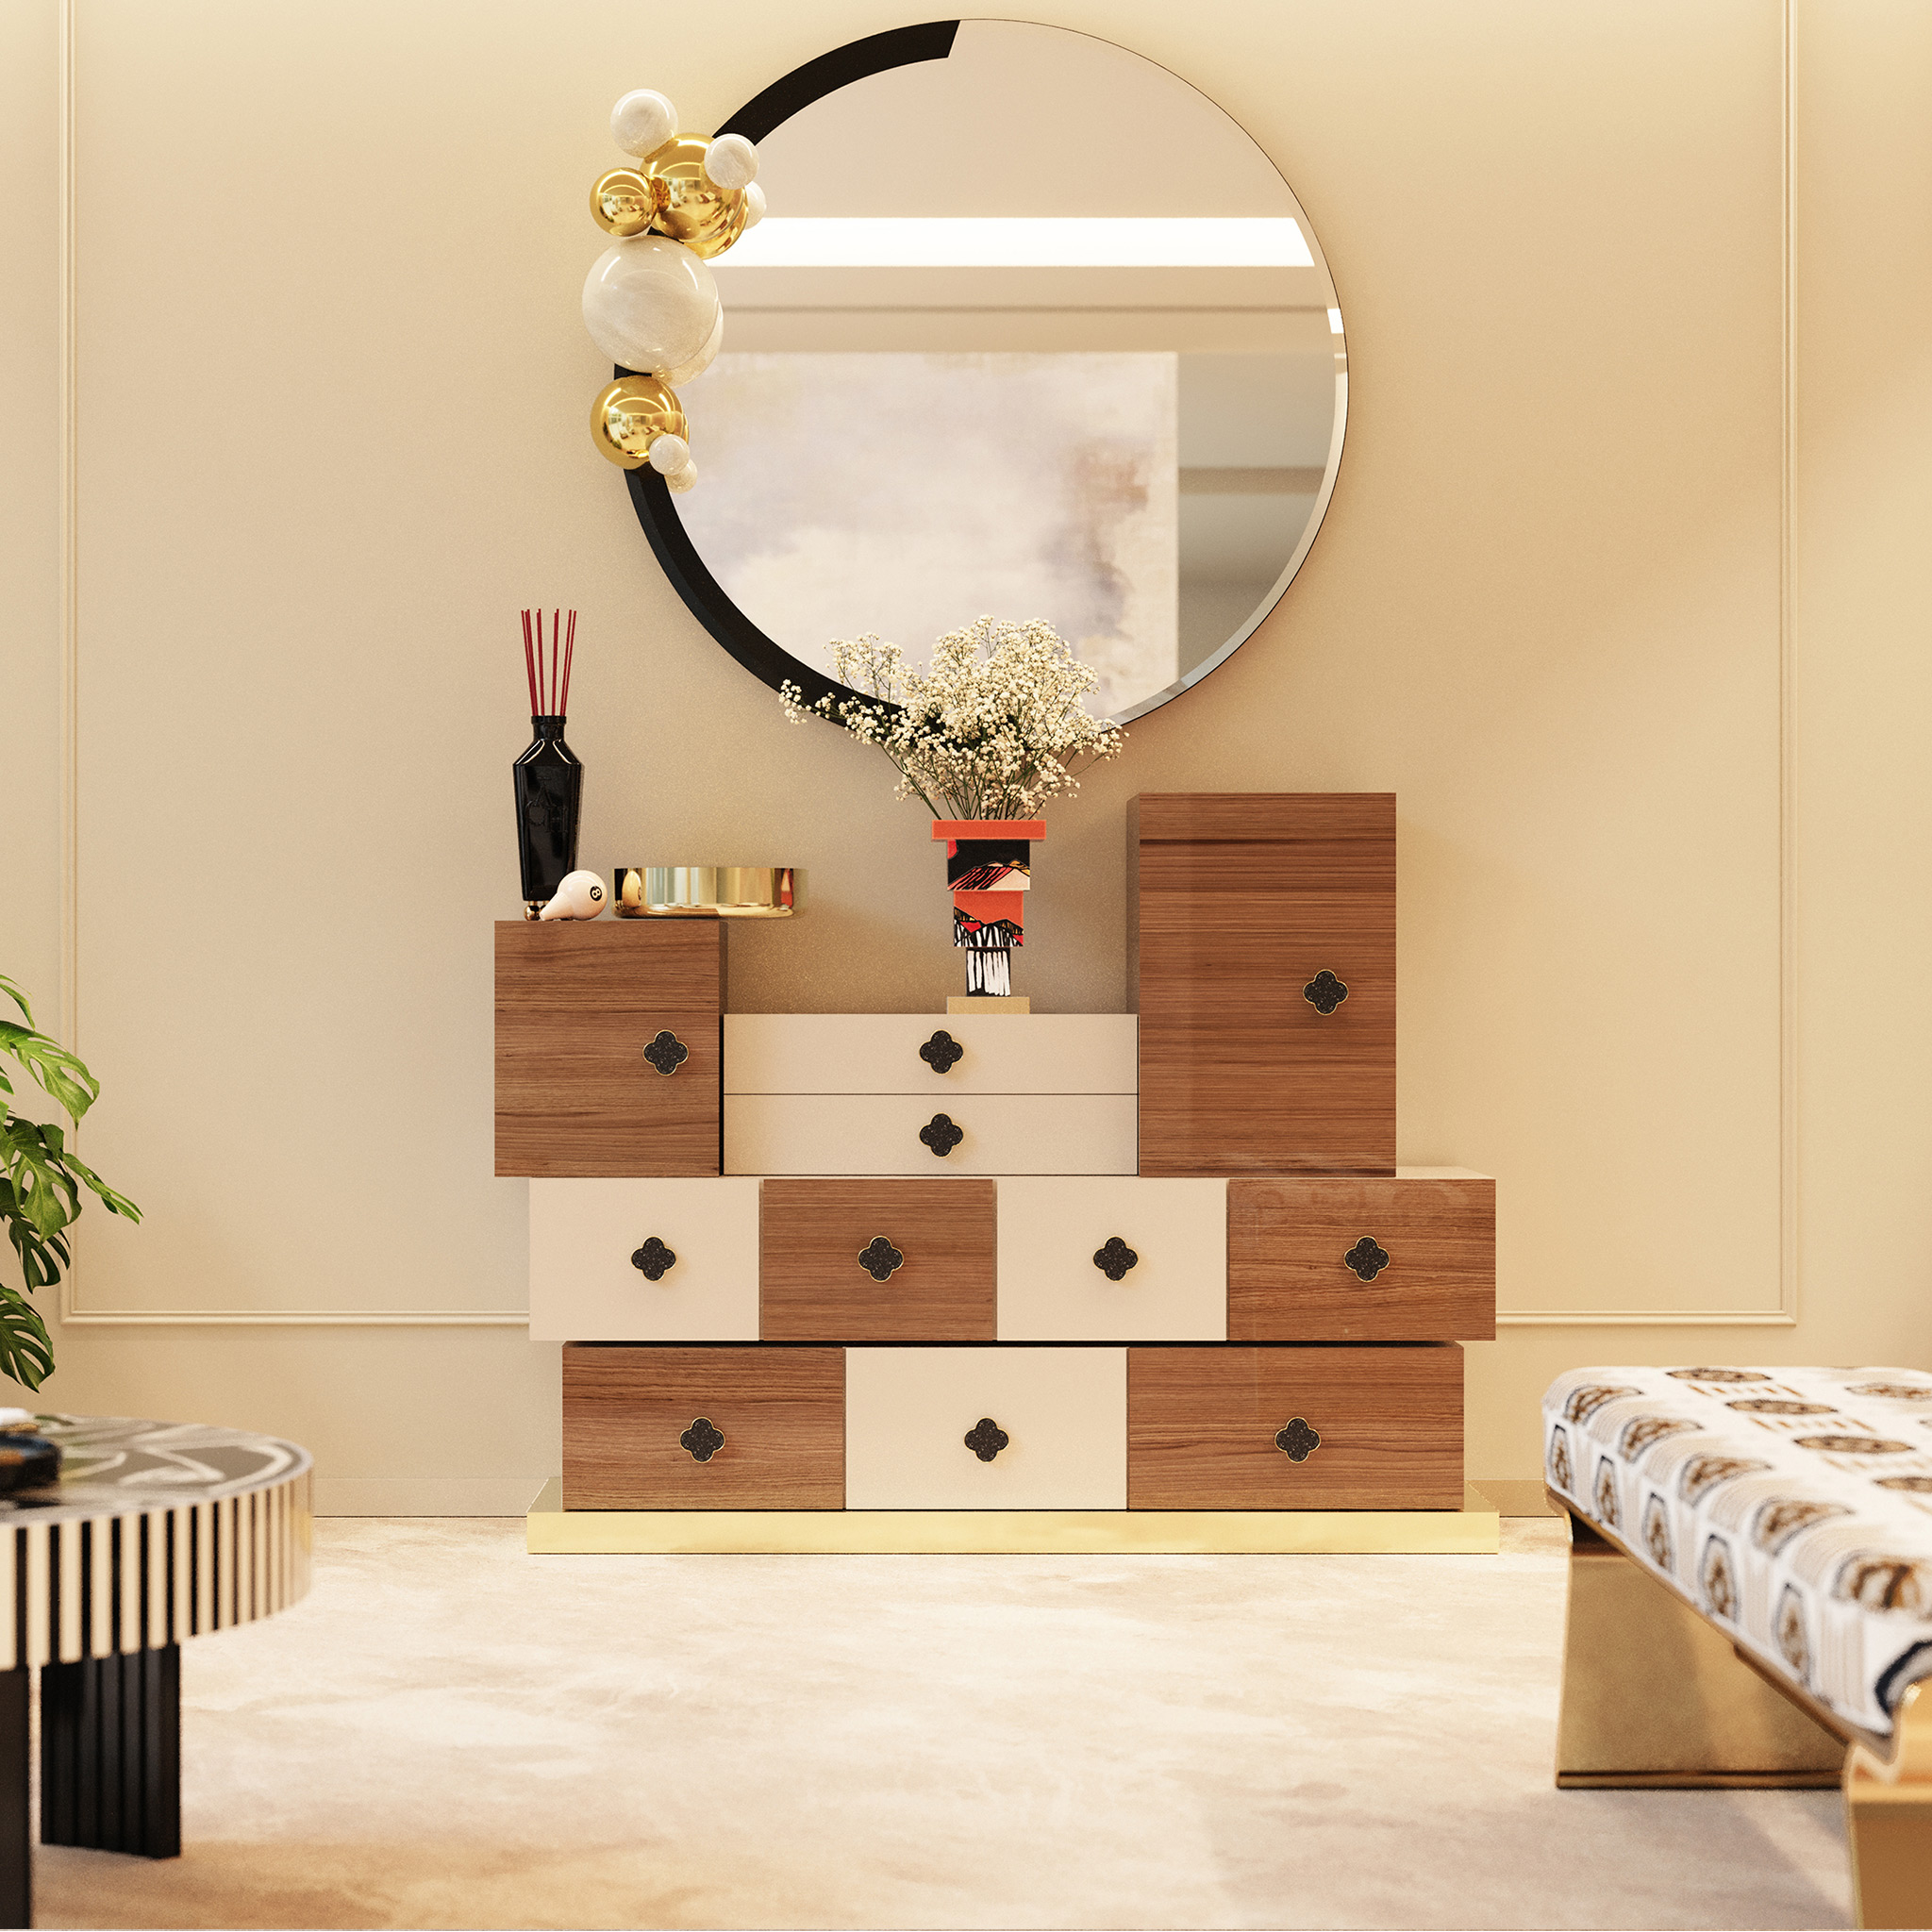 Titan decorative wall mirror with modern style furniture: malala chest of drawers by hommés studio